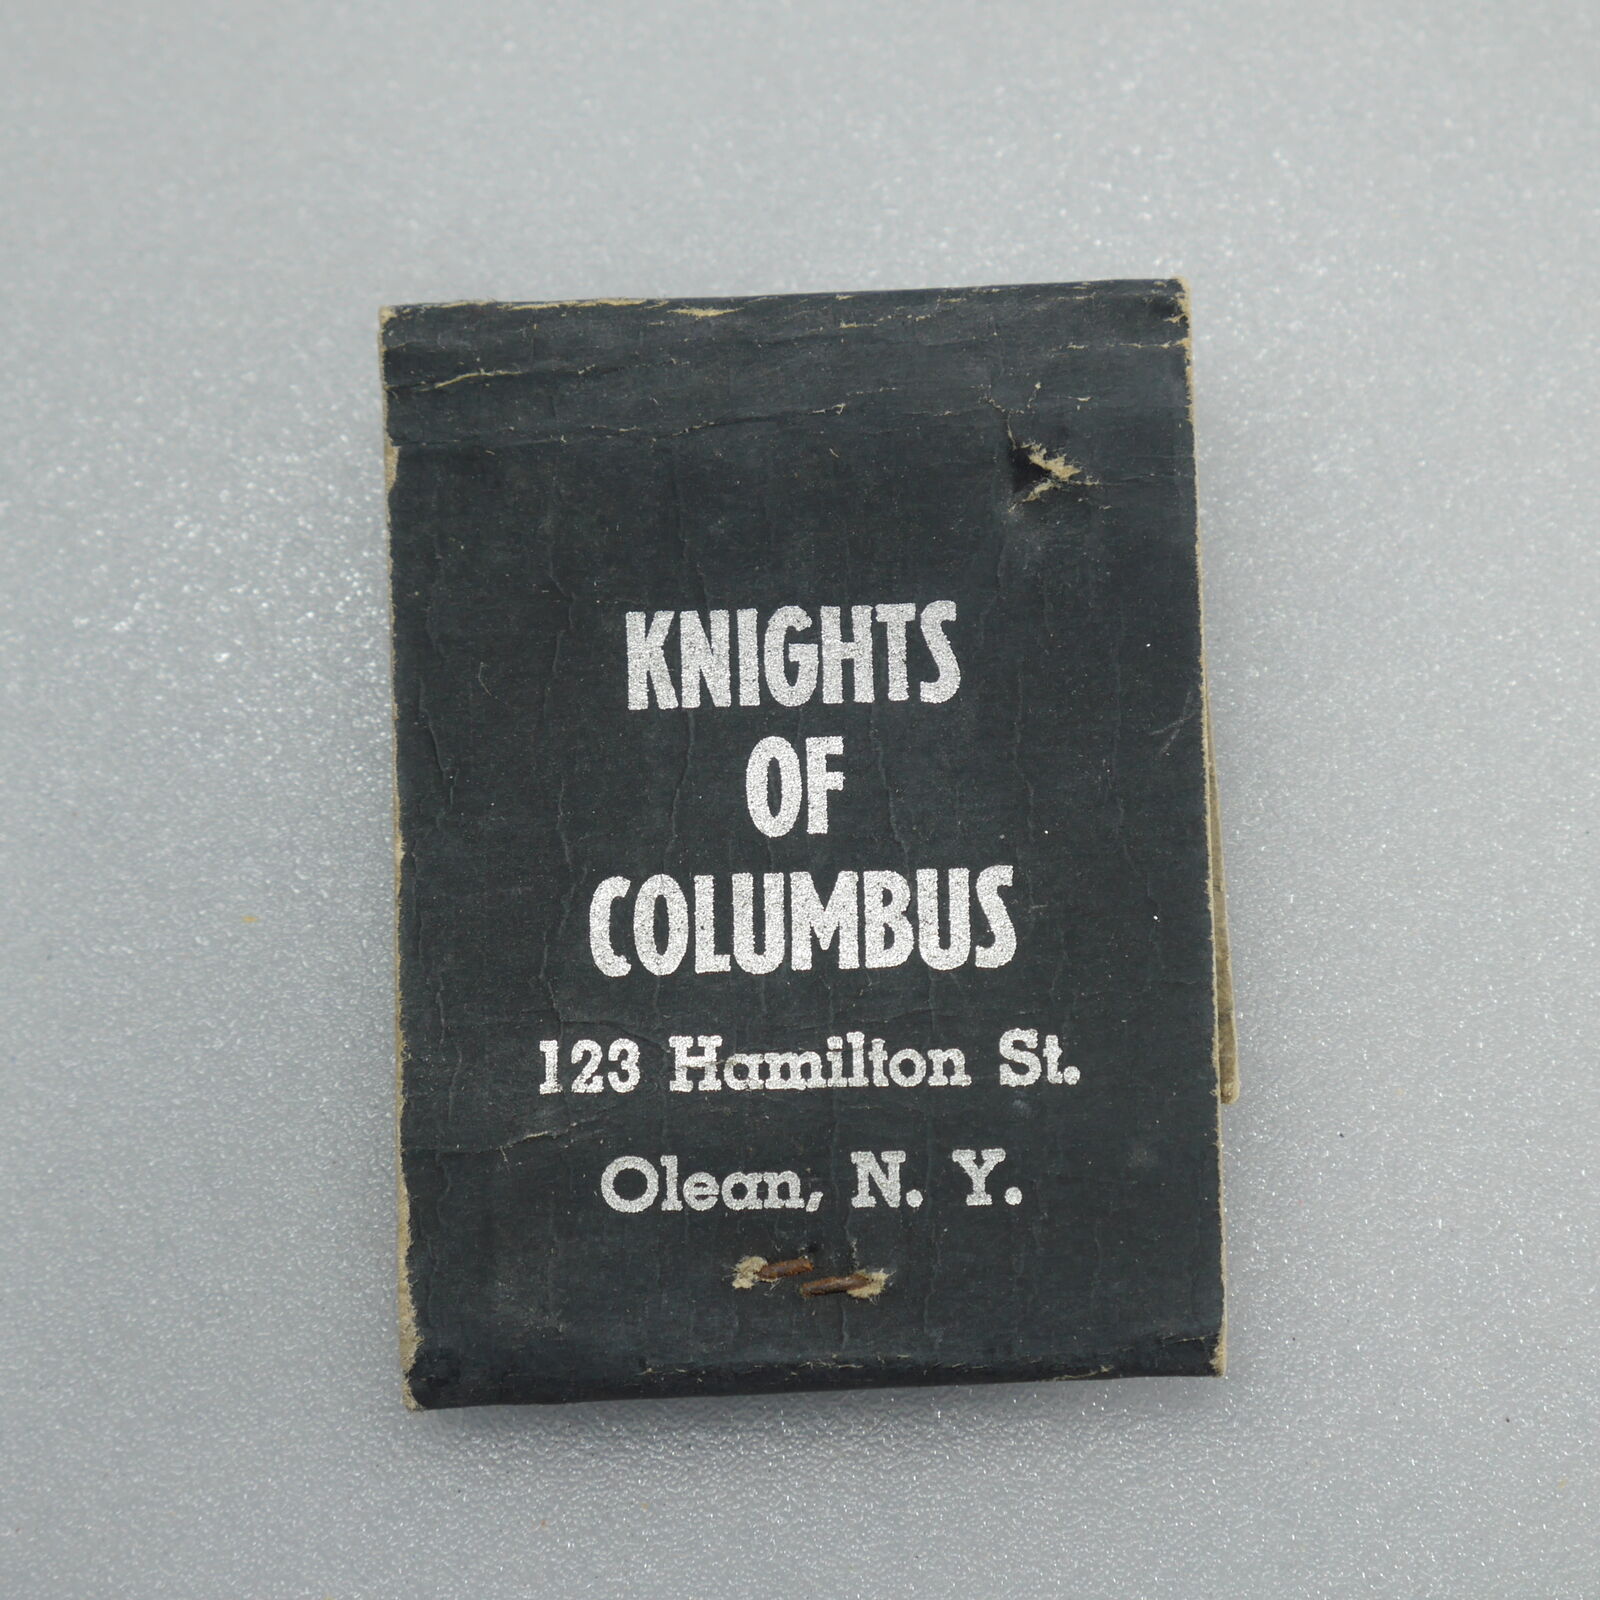 Knights of Columbus Olean NY Vintage Matchbook Cover Struck